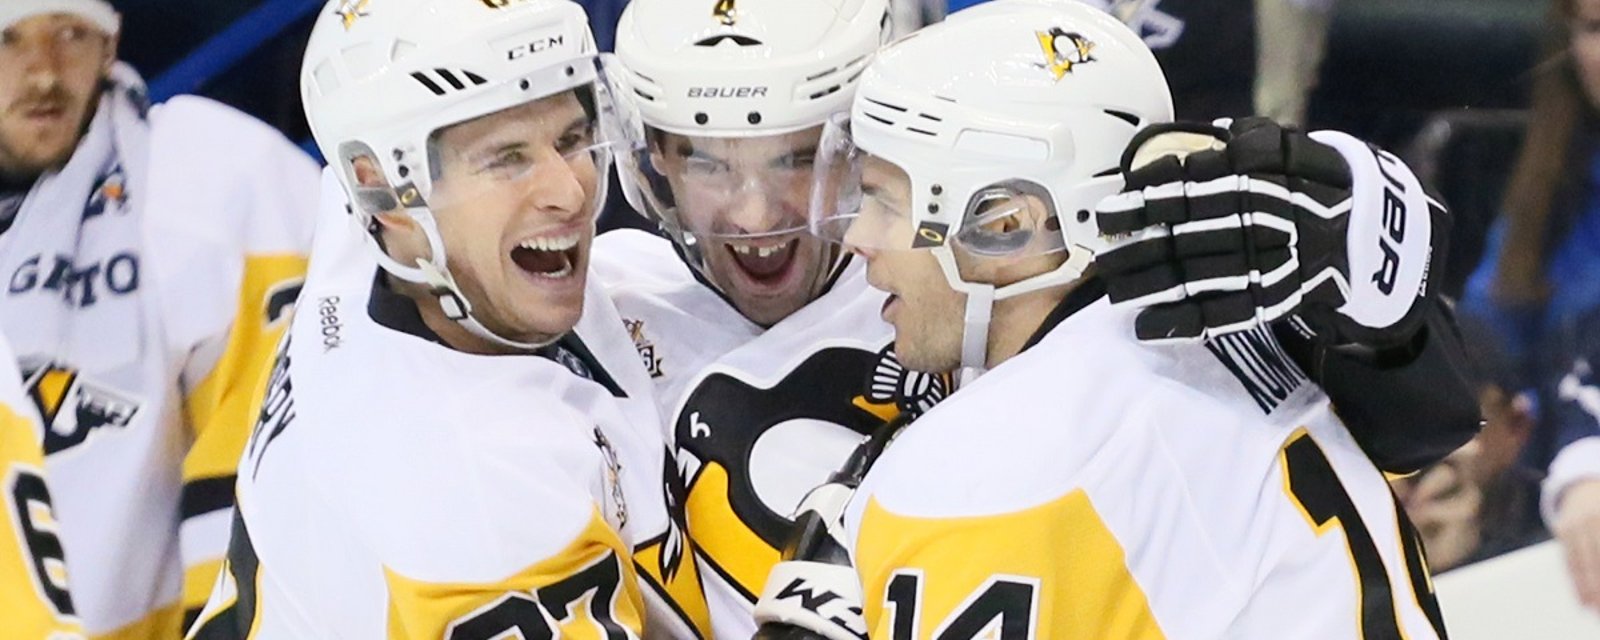 Three big injuries on the Penguins roster ahead of Game 3 tonight. 